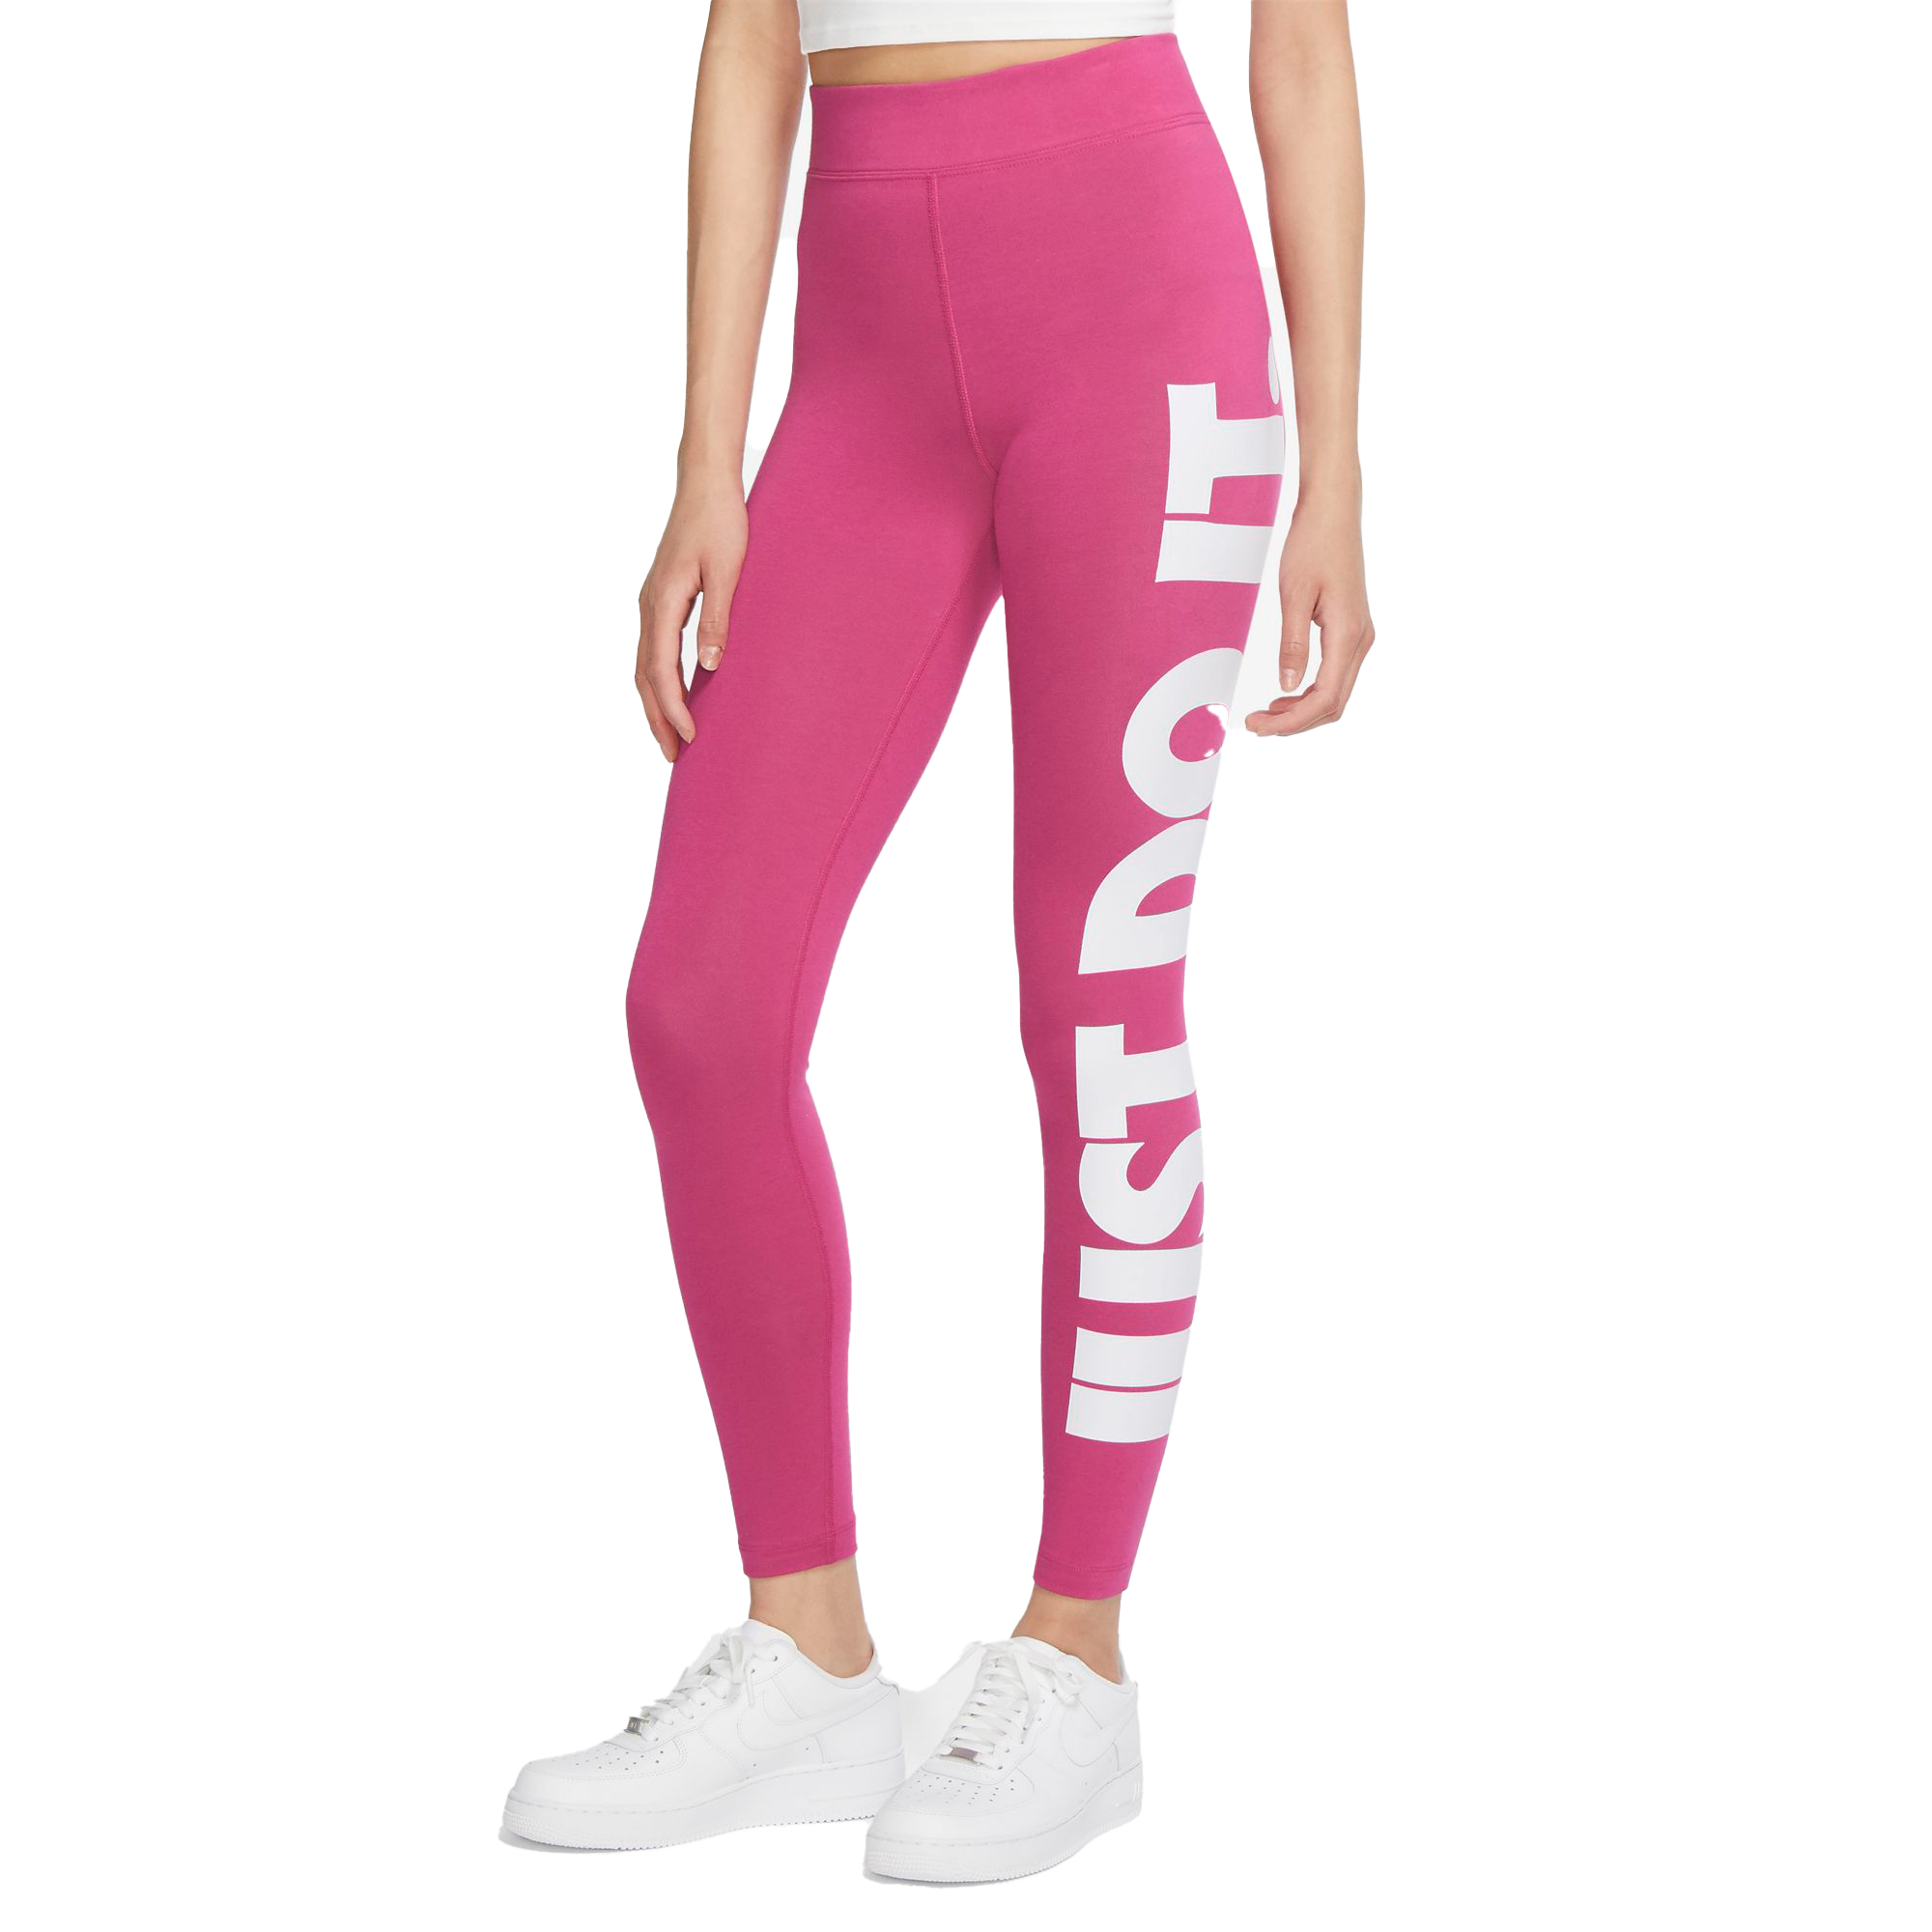 Nike Pink Active Pants Size 2X (Plus) - 61% off